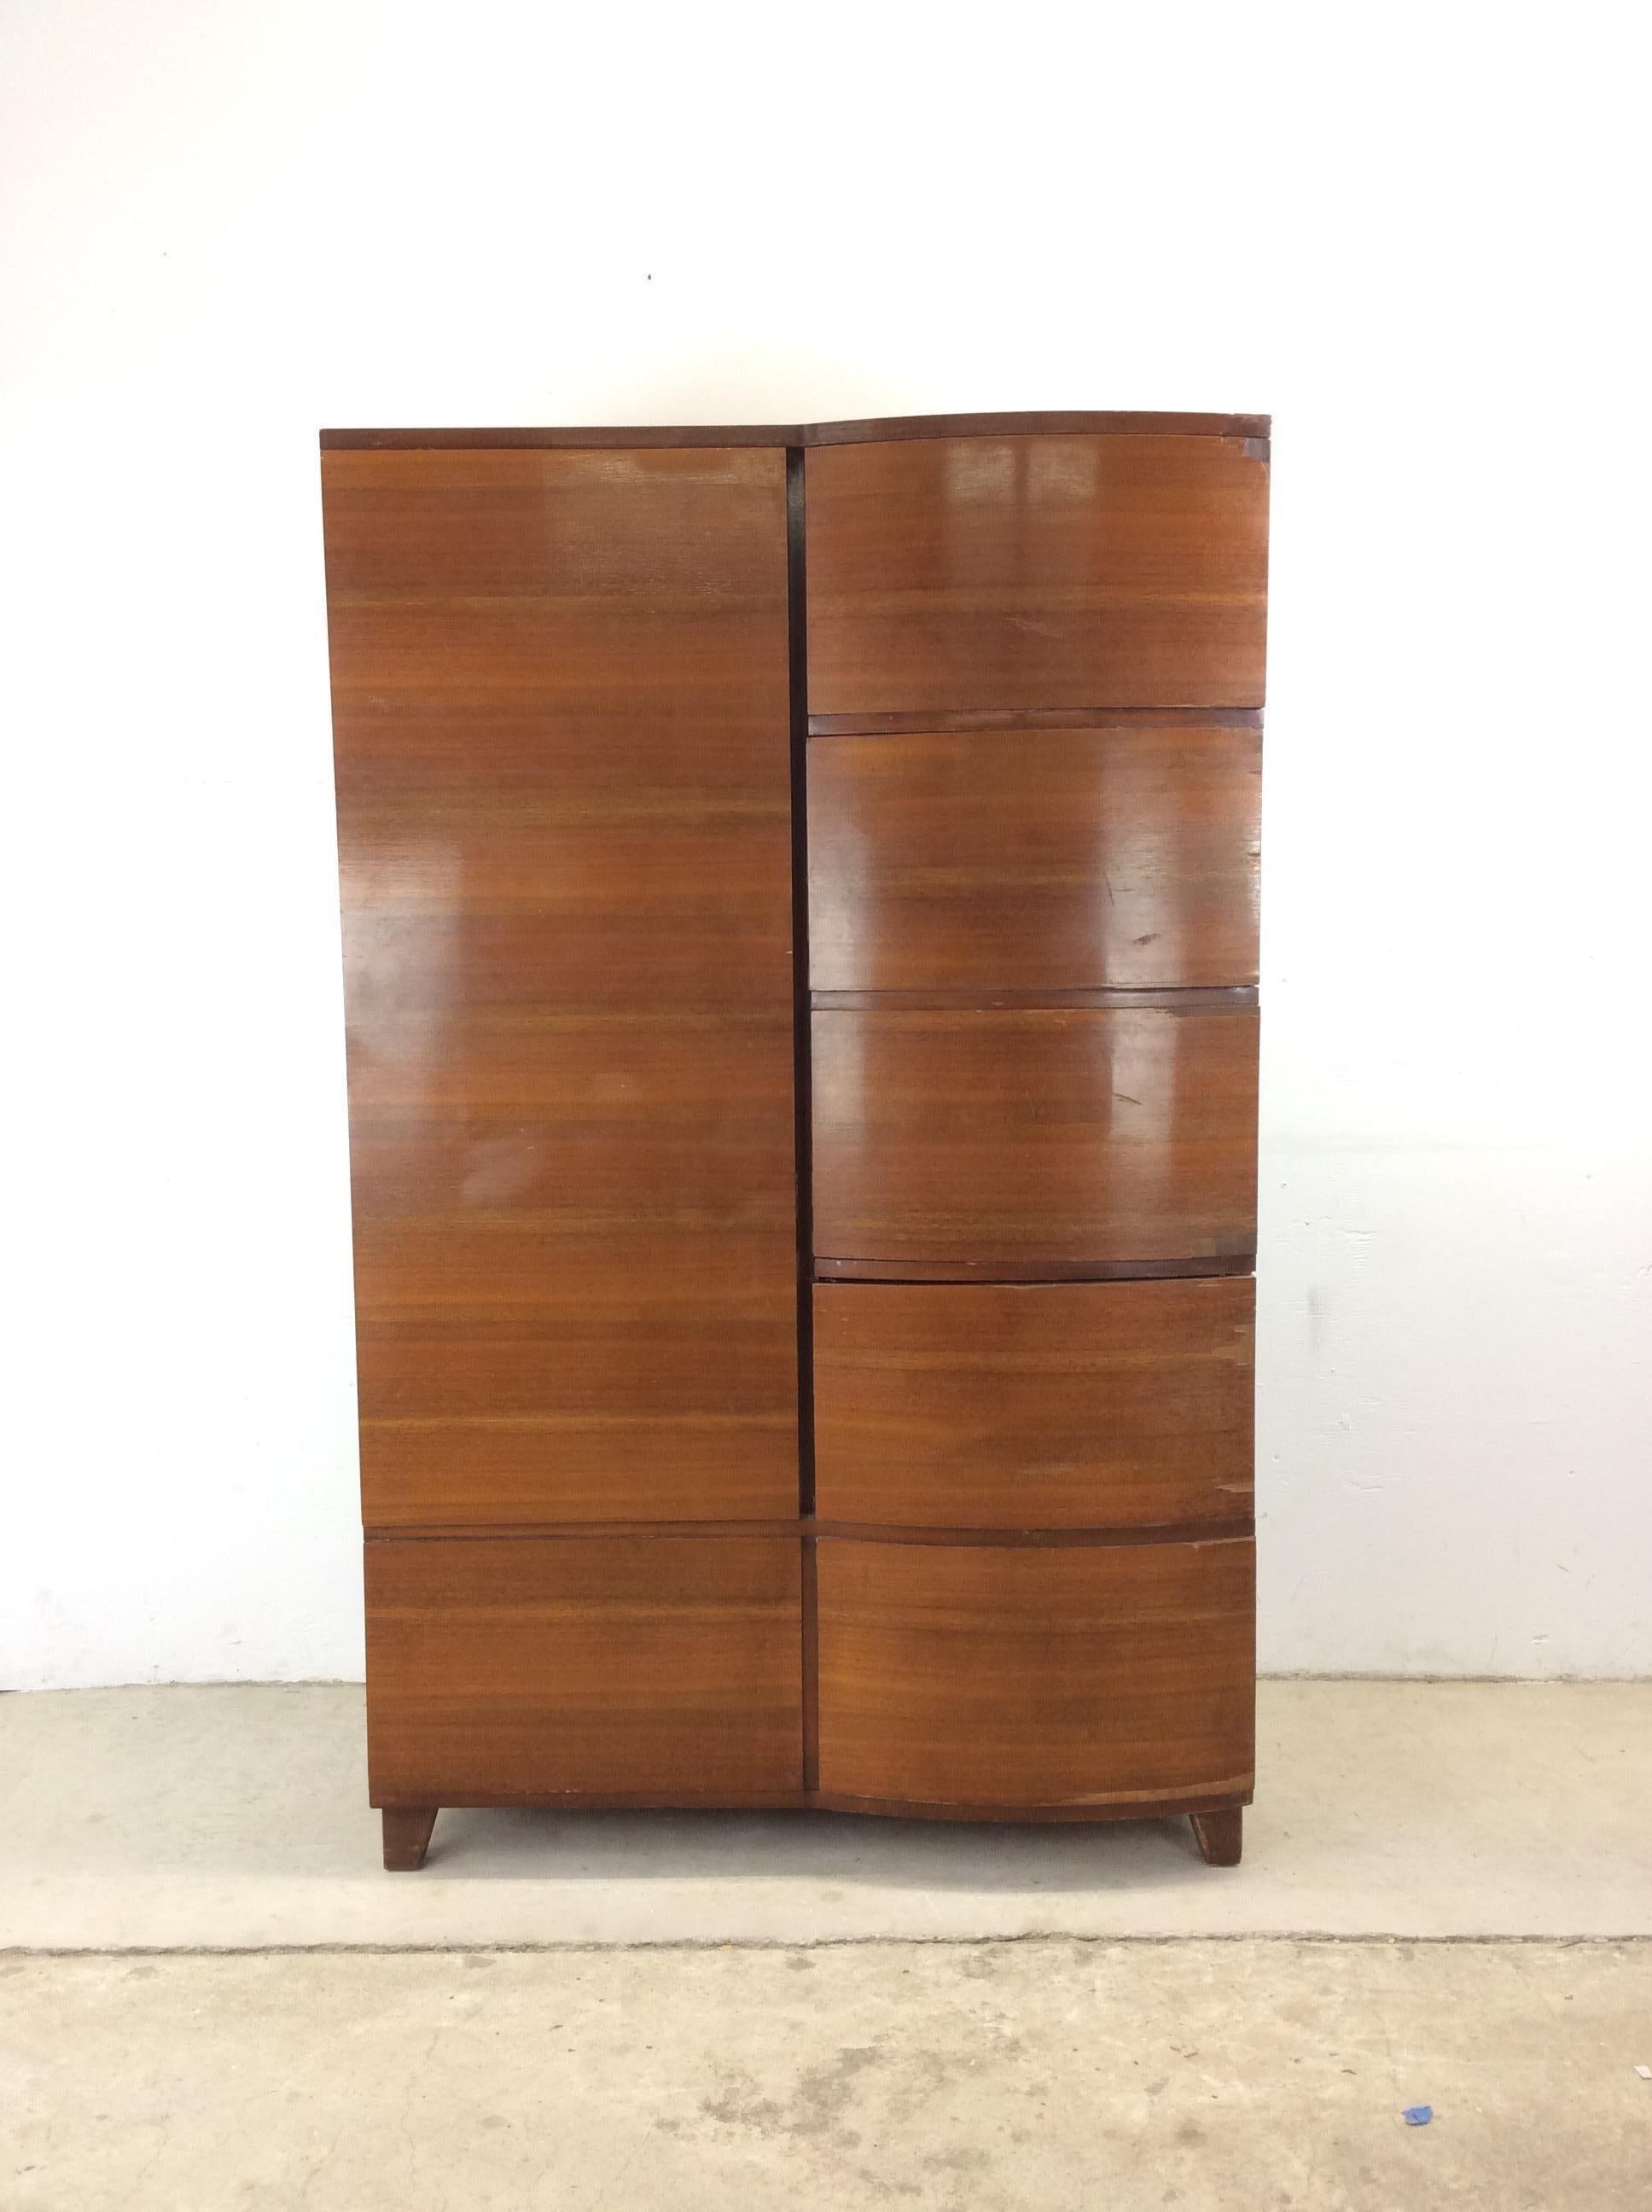 This Art Deco armoire features cedar lined wardrobe cabinet for hanging clothes and four dovetailed drawers with bentwood drawer faces.

Matching nightstands and three drawer chest available separately. 

Dimensions: 38w 21d 61h

Condition: Original